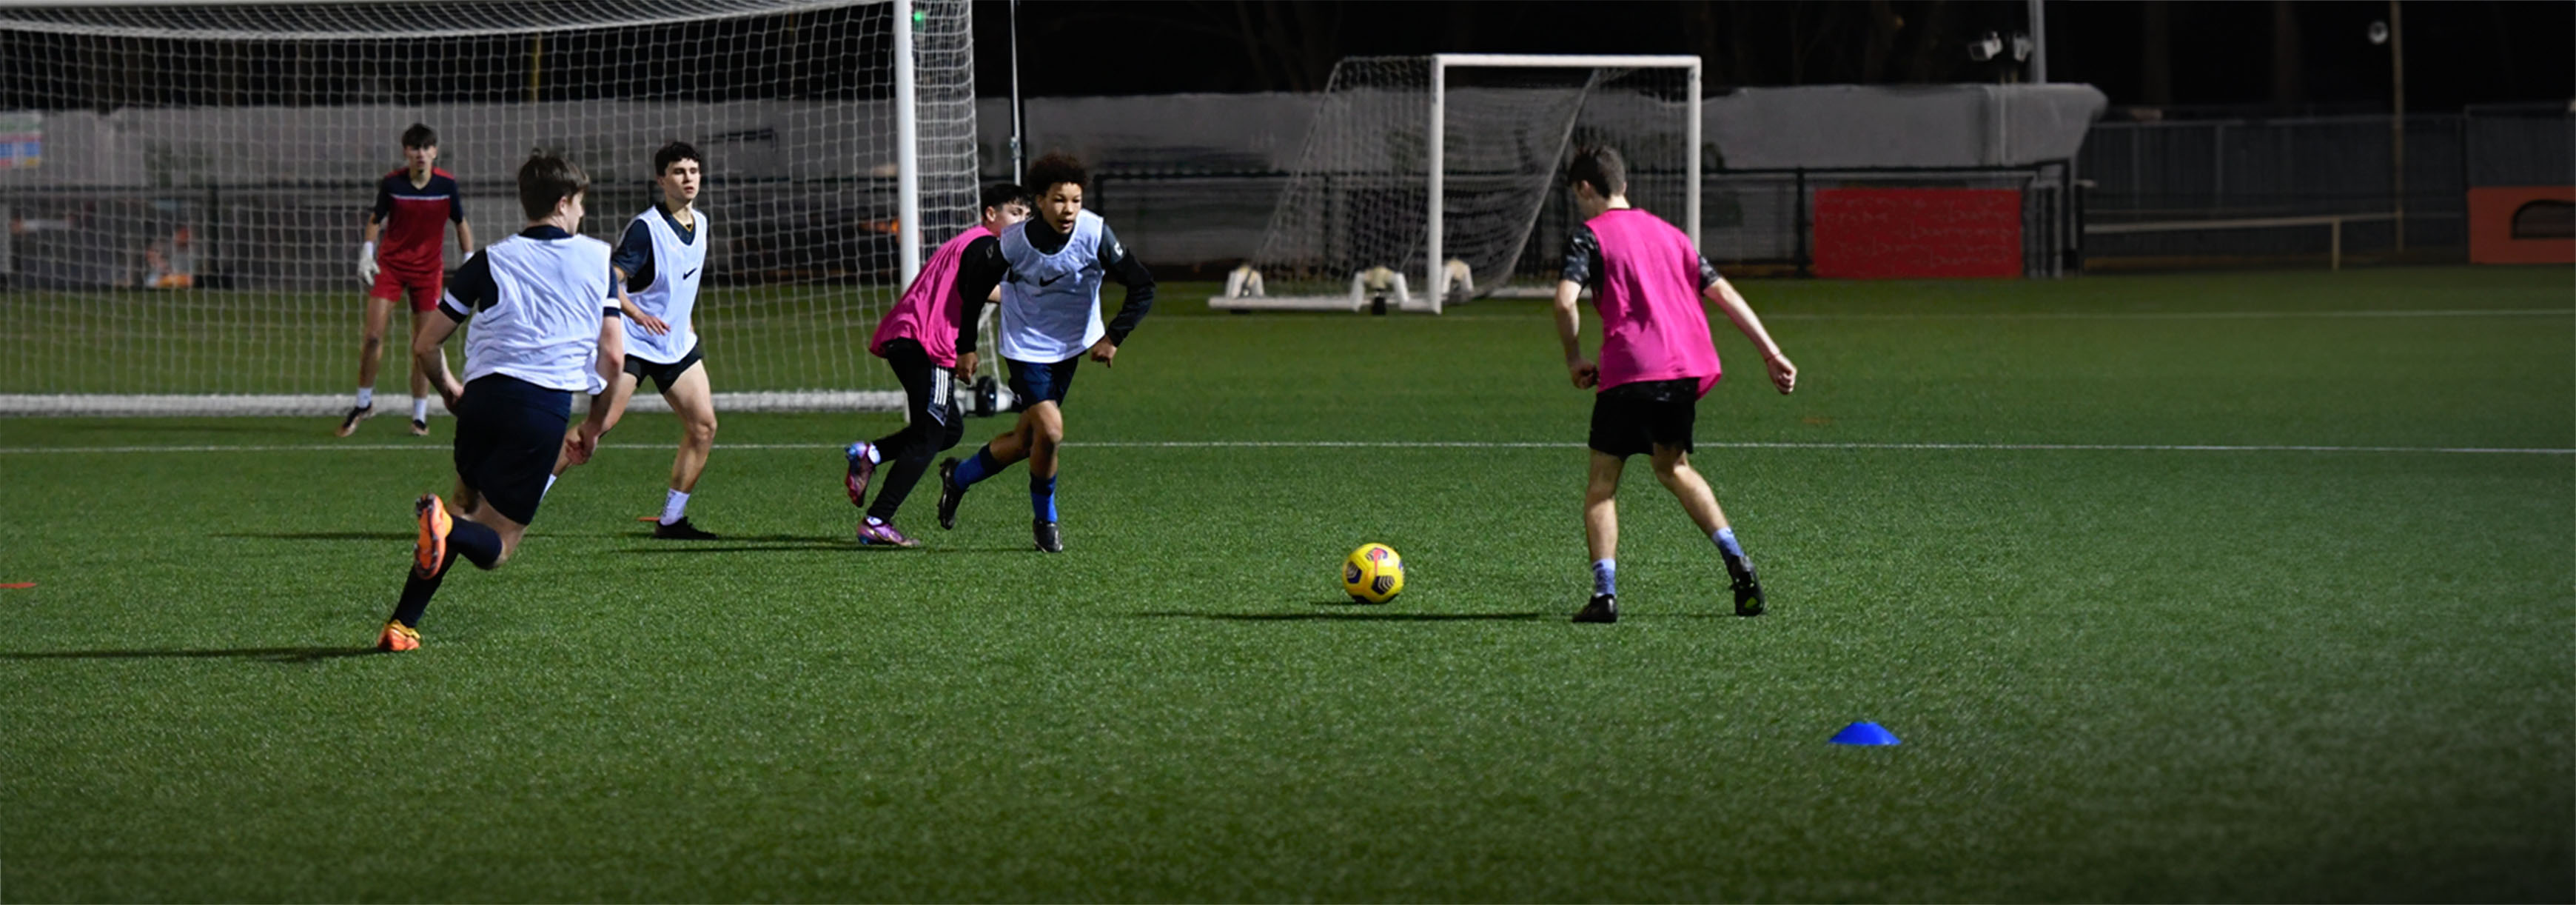 During a training session, a player makes a run in between two defenders in the hope of receiving a pass from his teammate out wide.